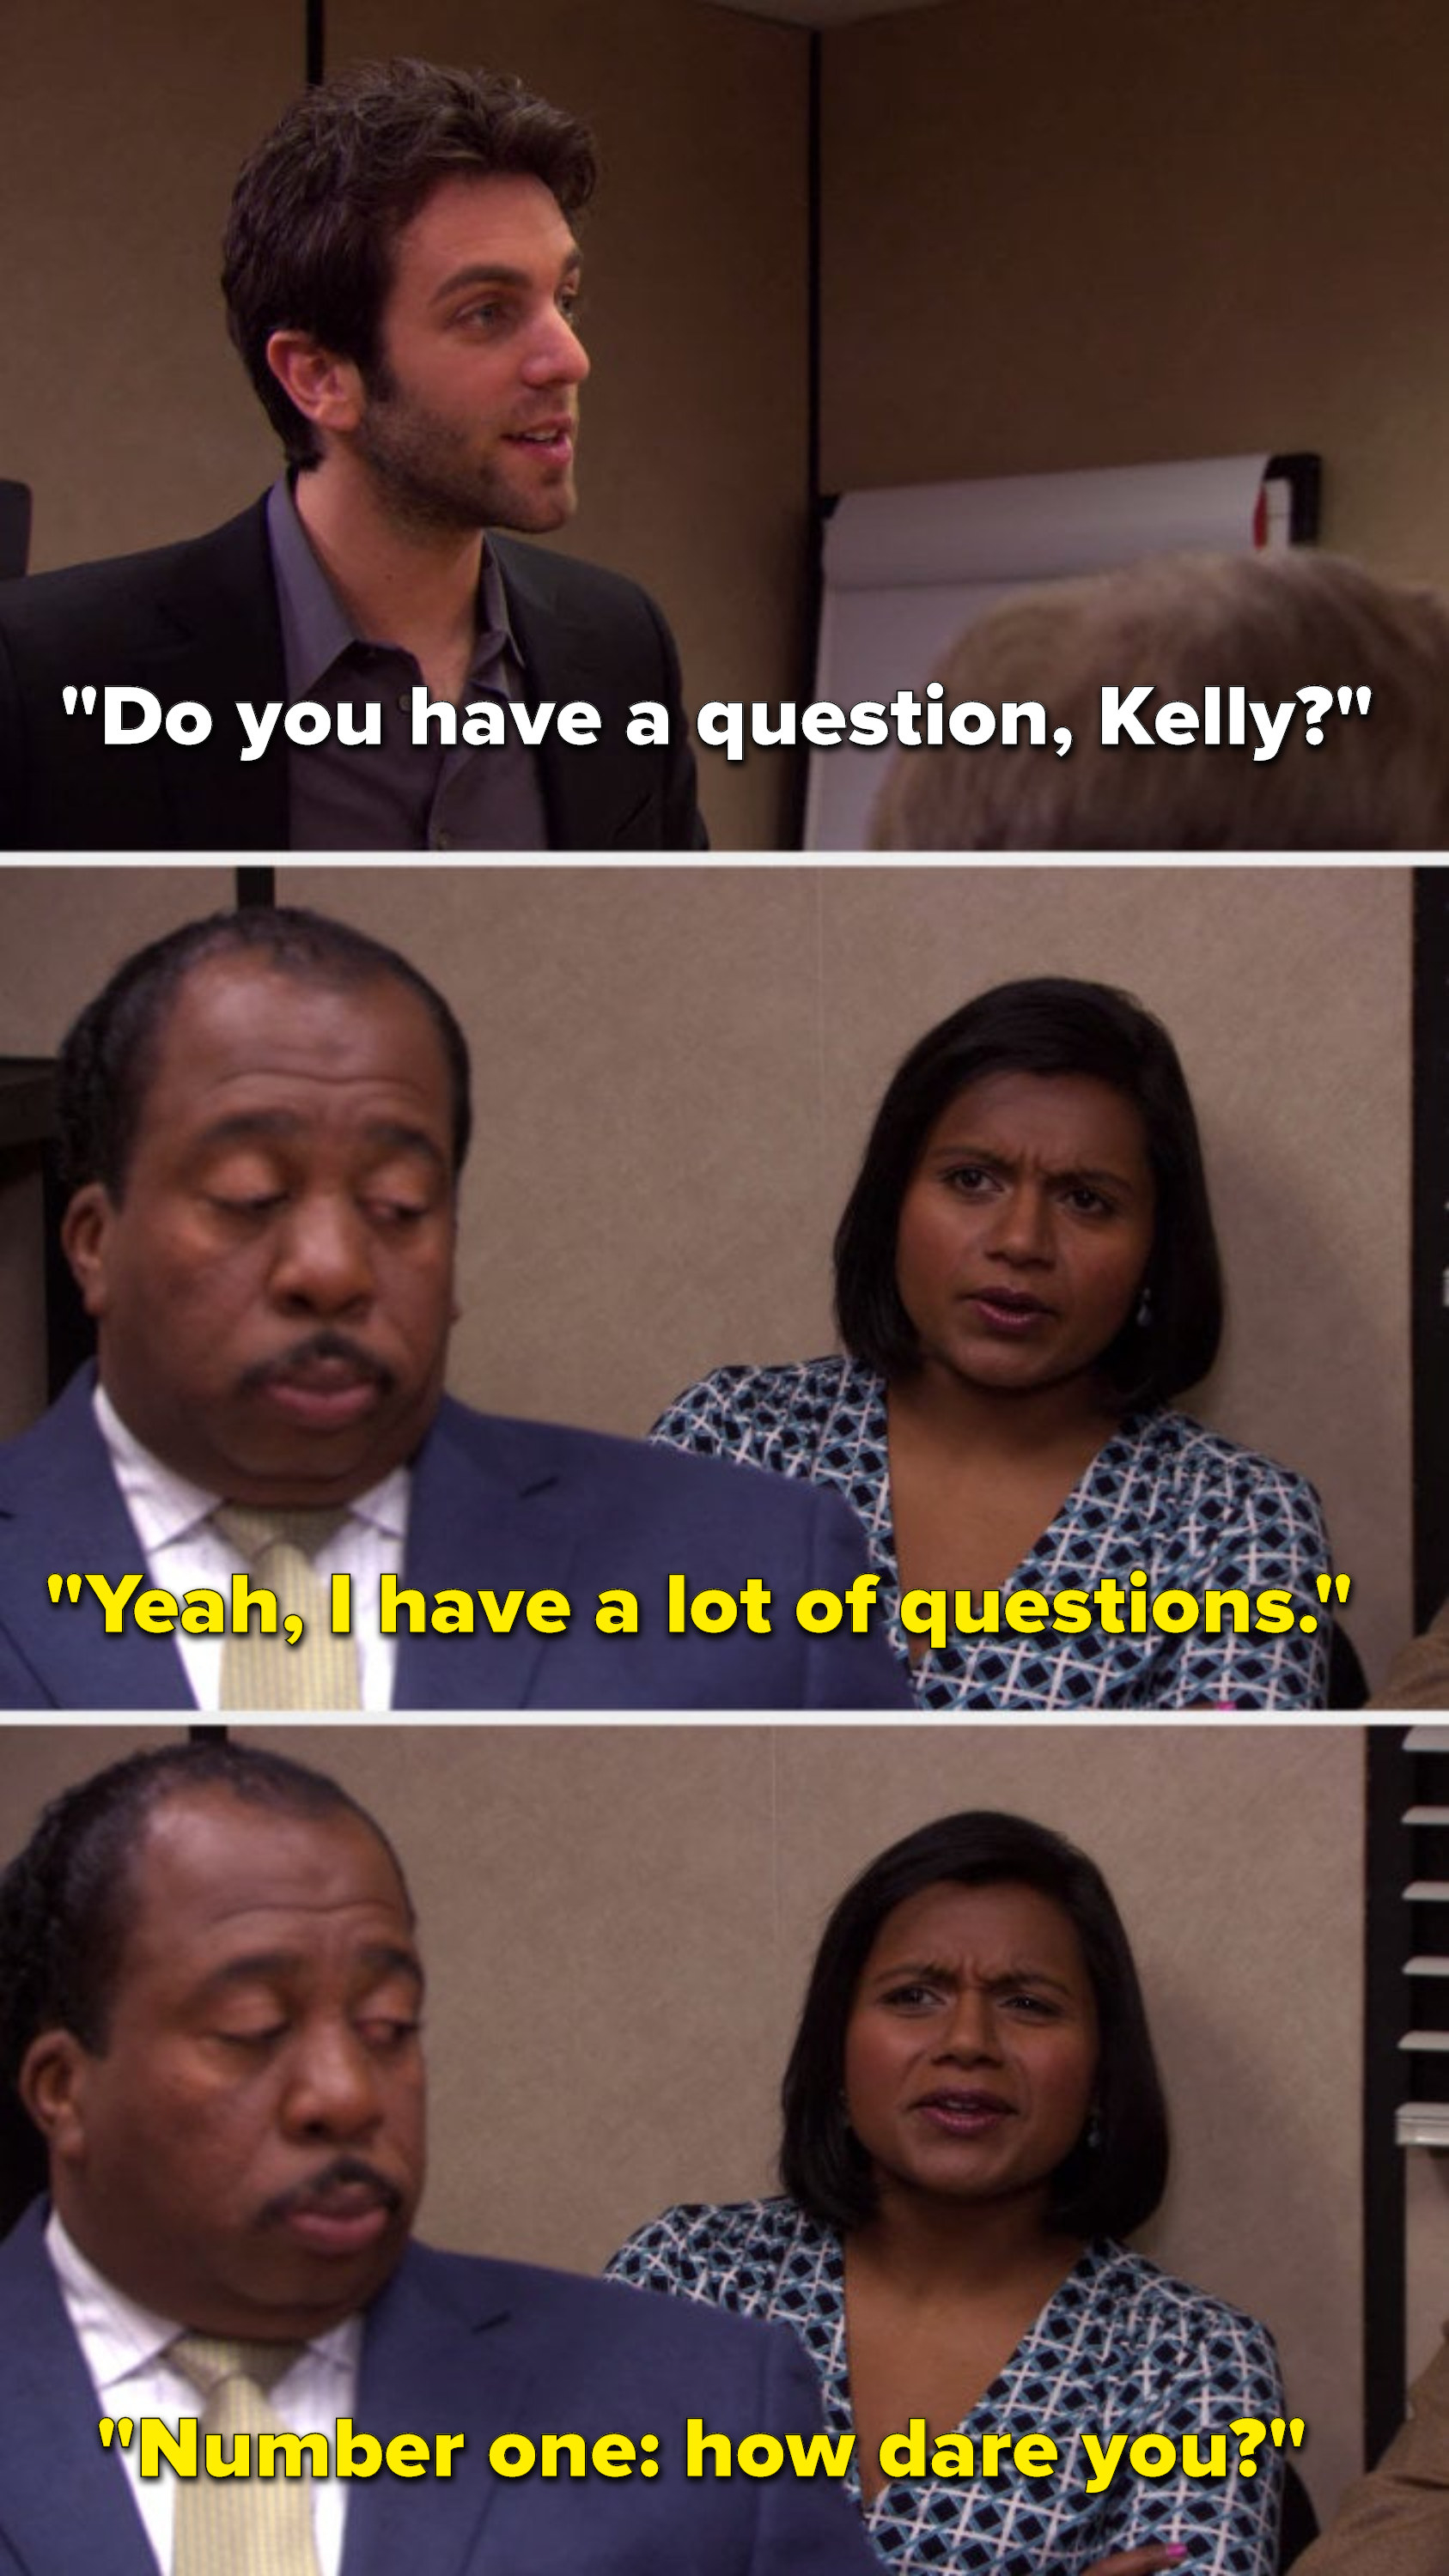 Ryan says, &quot;Do you have a question, Kelly,&quot; and Kelly says, &quot;Yeah, I have a lot of questions, number one: how dare you&quot;